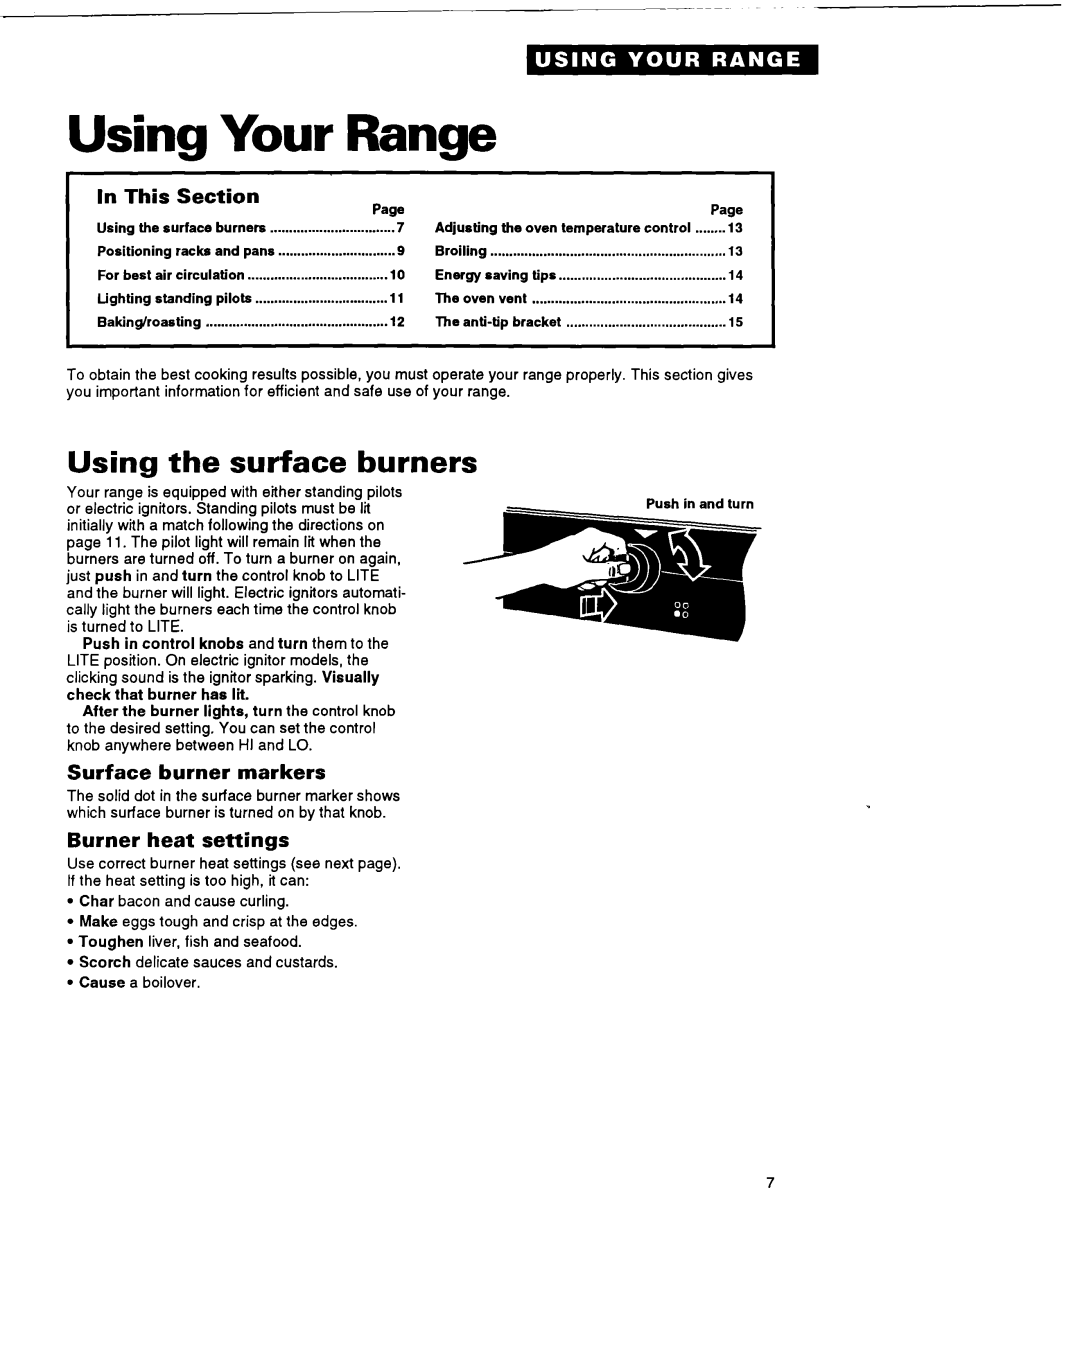 Whirlpool FGP325A Your, Range, Using the surface burners, This, Section, Surface burner markers, Burner heat settings 